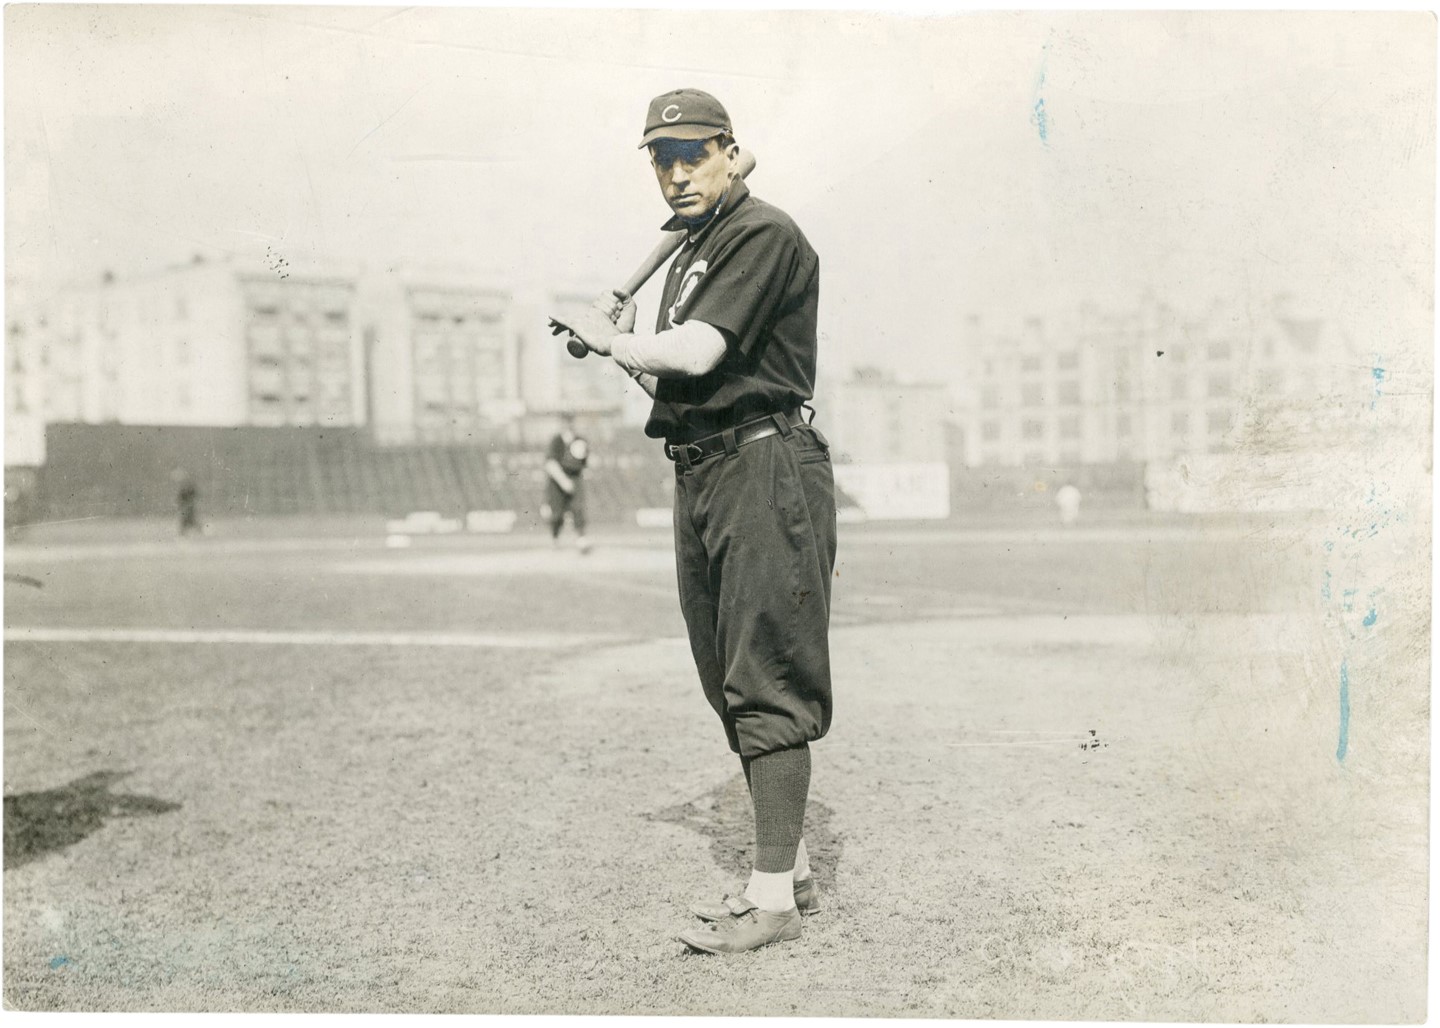 The Brown Brothers Collection - Joe Tinker Posed w/Bat Photograph